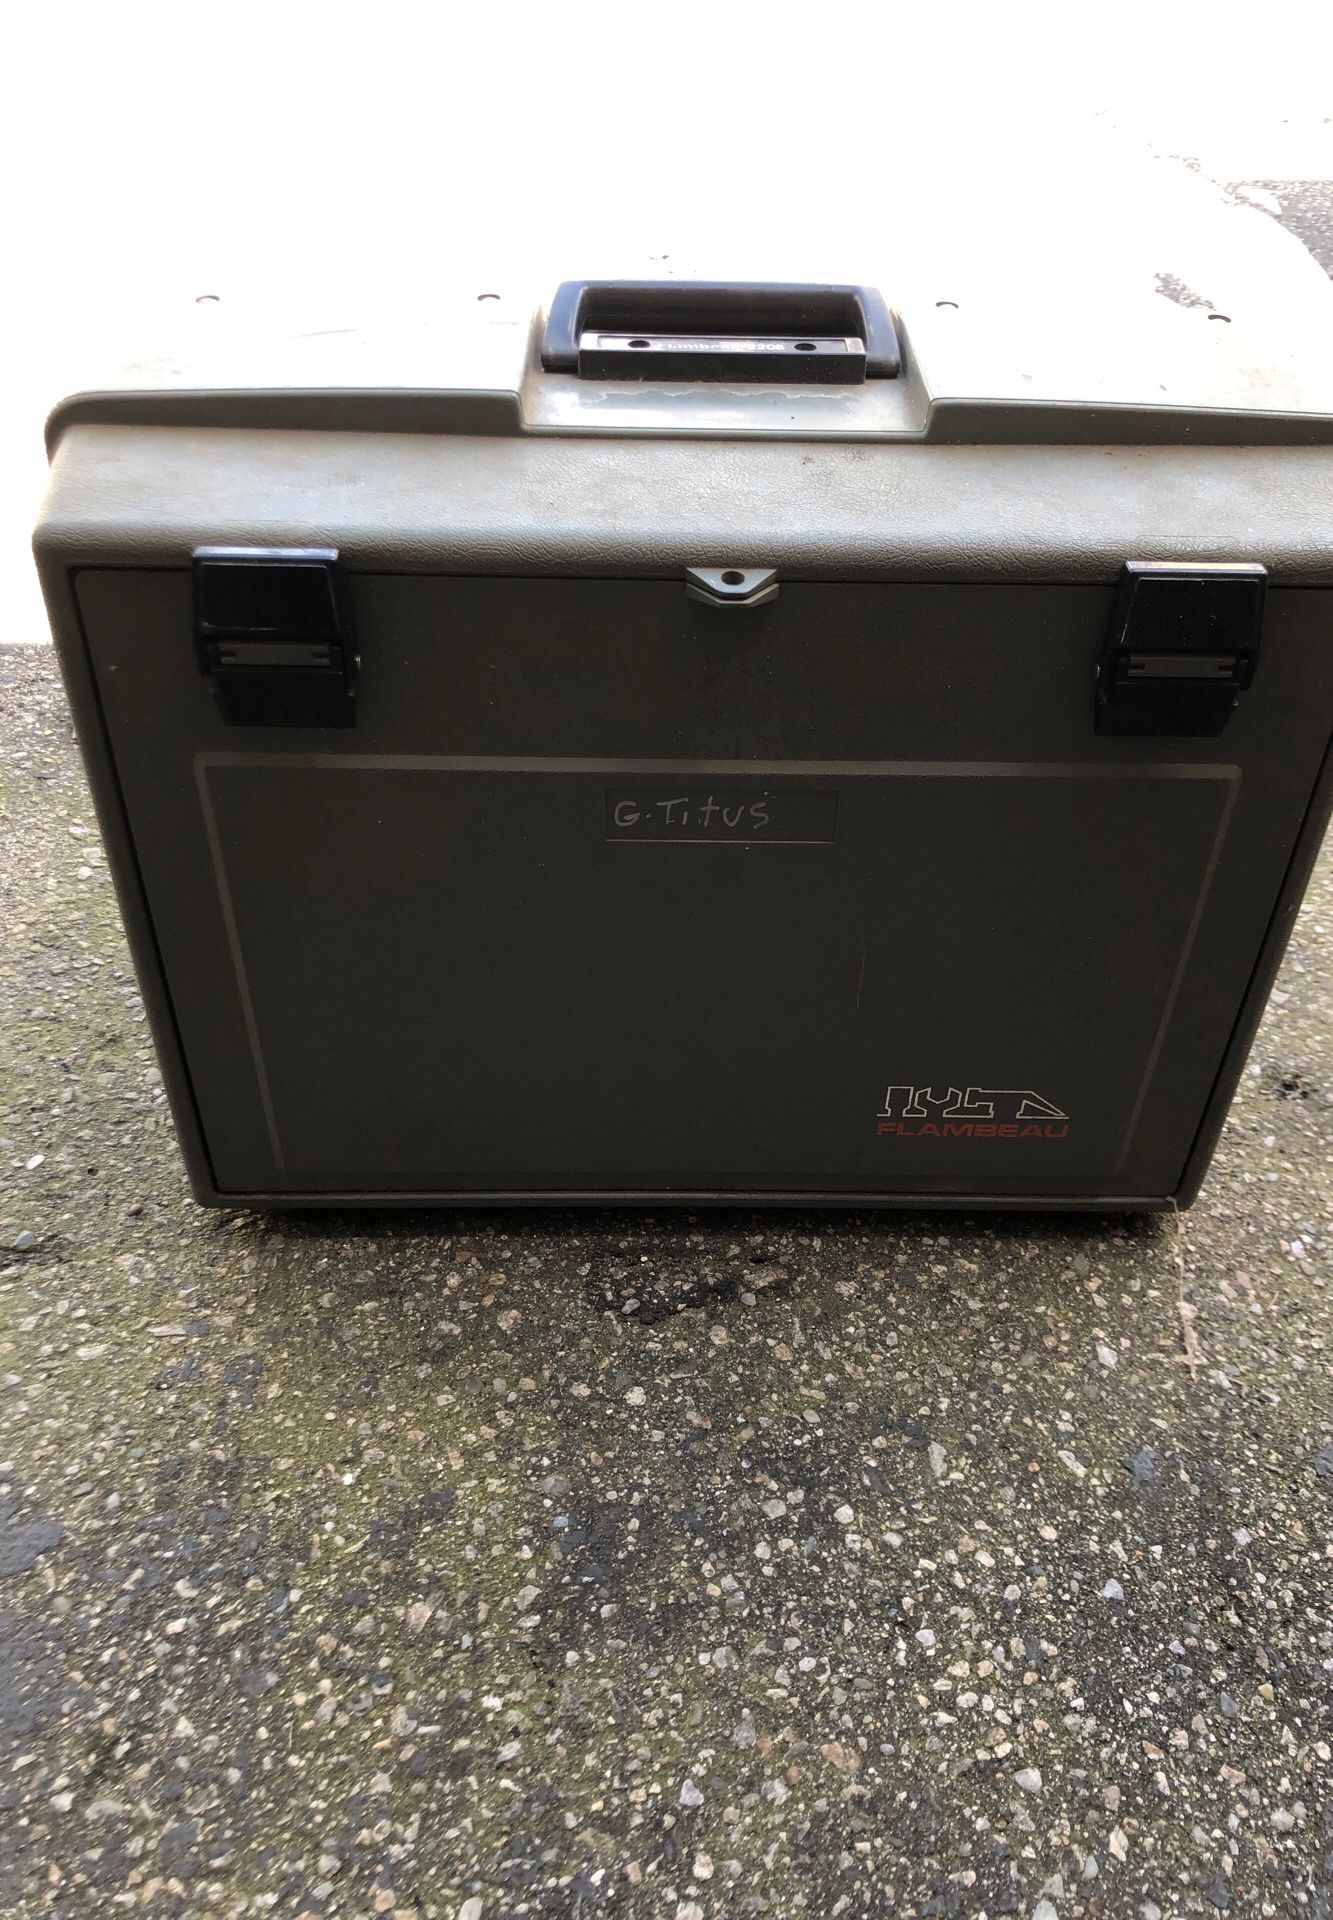 Flambeau Tackle Box 2206 for Sale in Pawtucket, RI - OfferUp